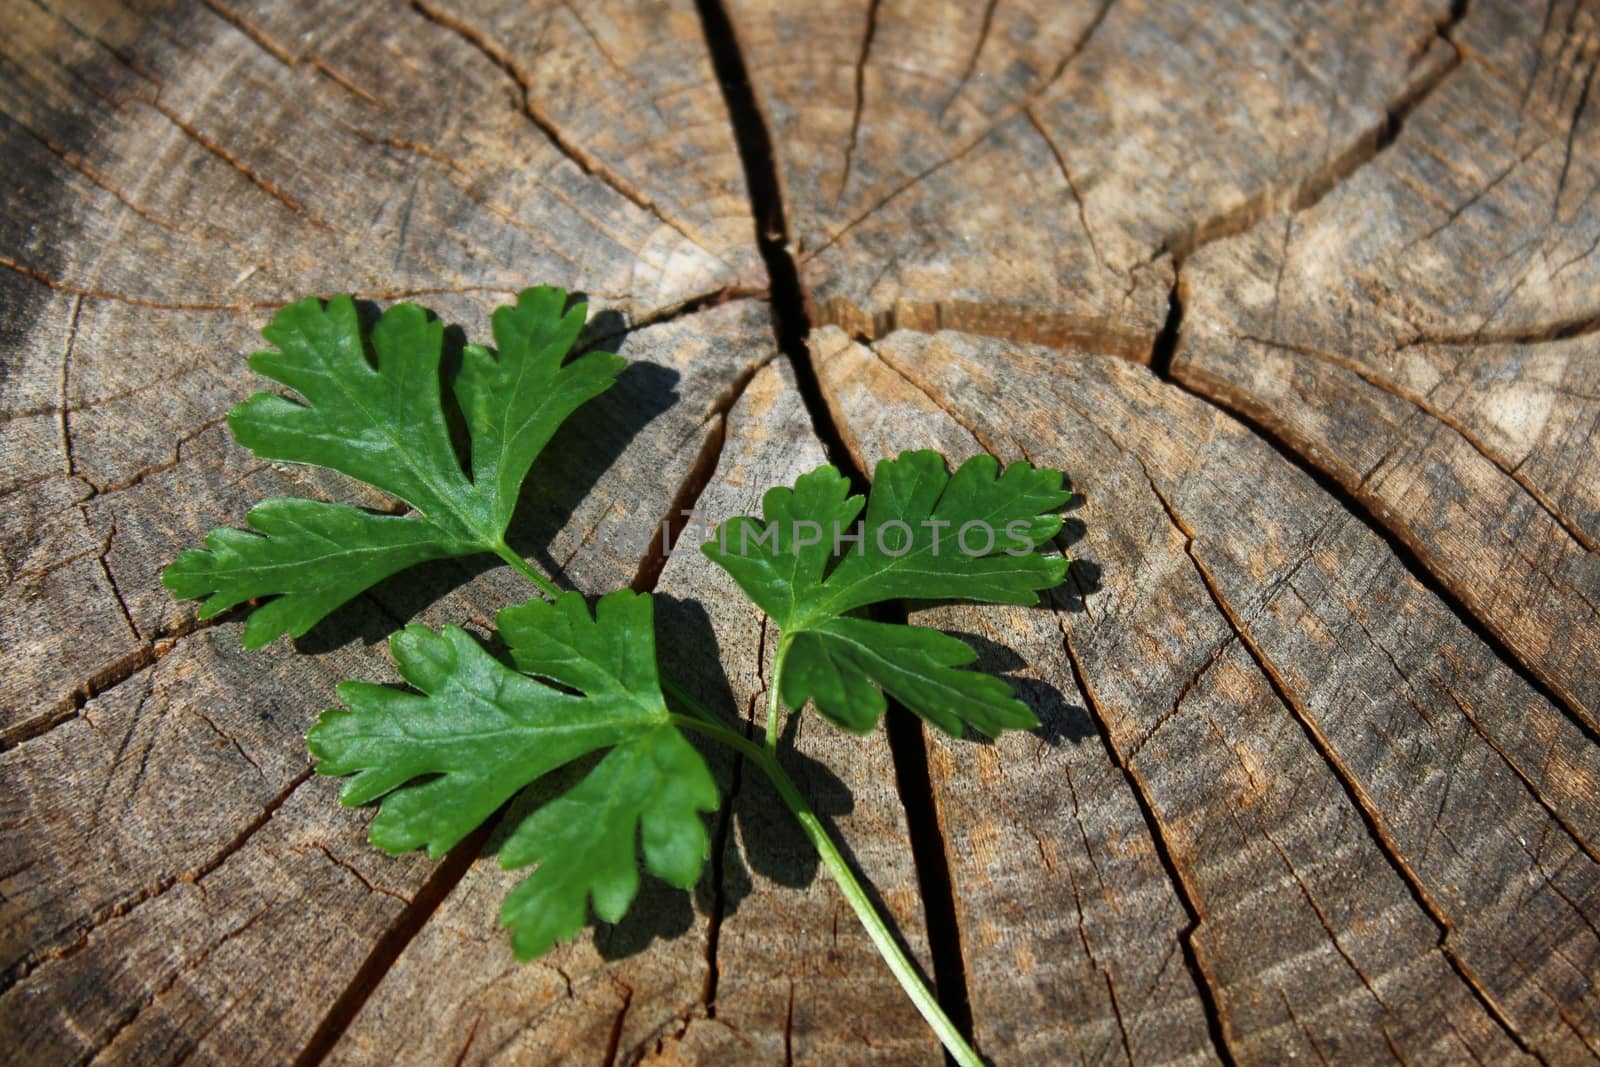 parsley on an old wood by martina_unbehauen